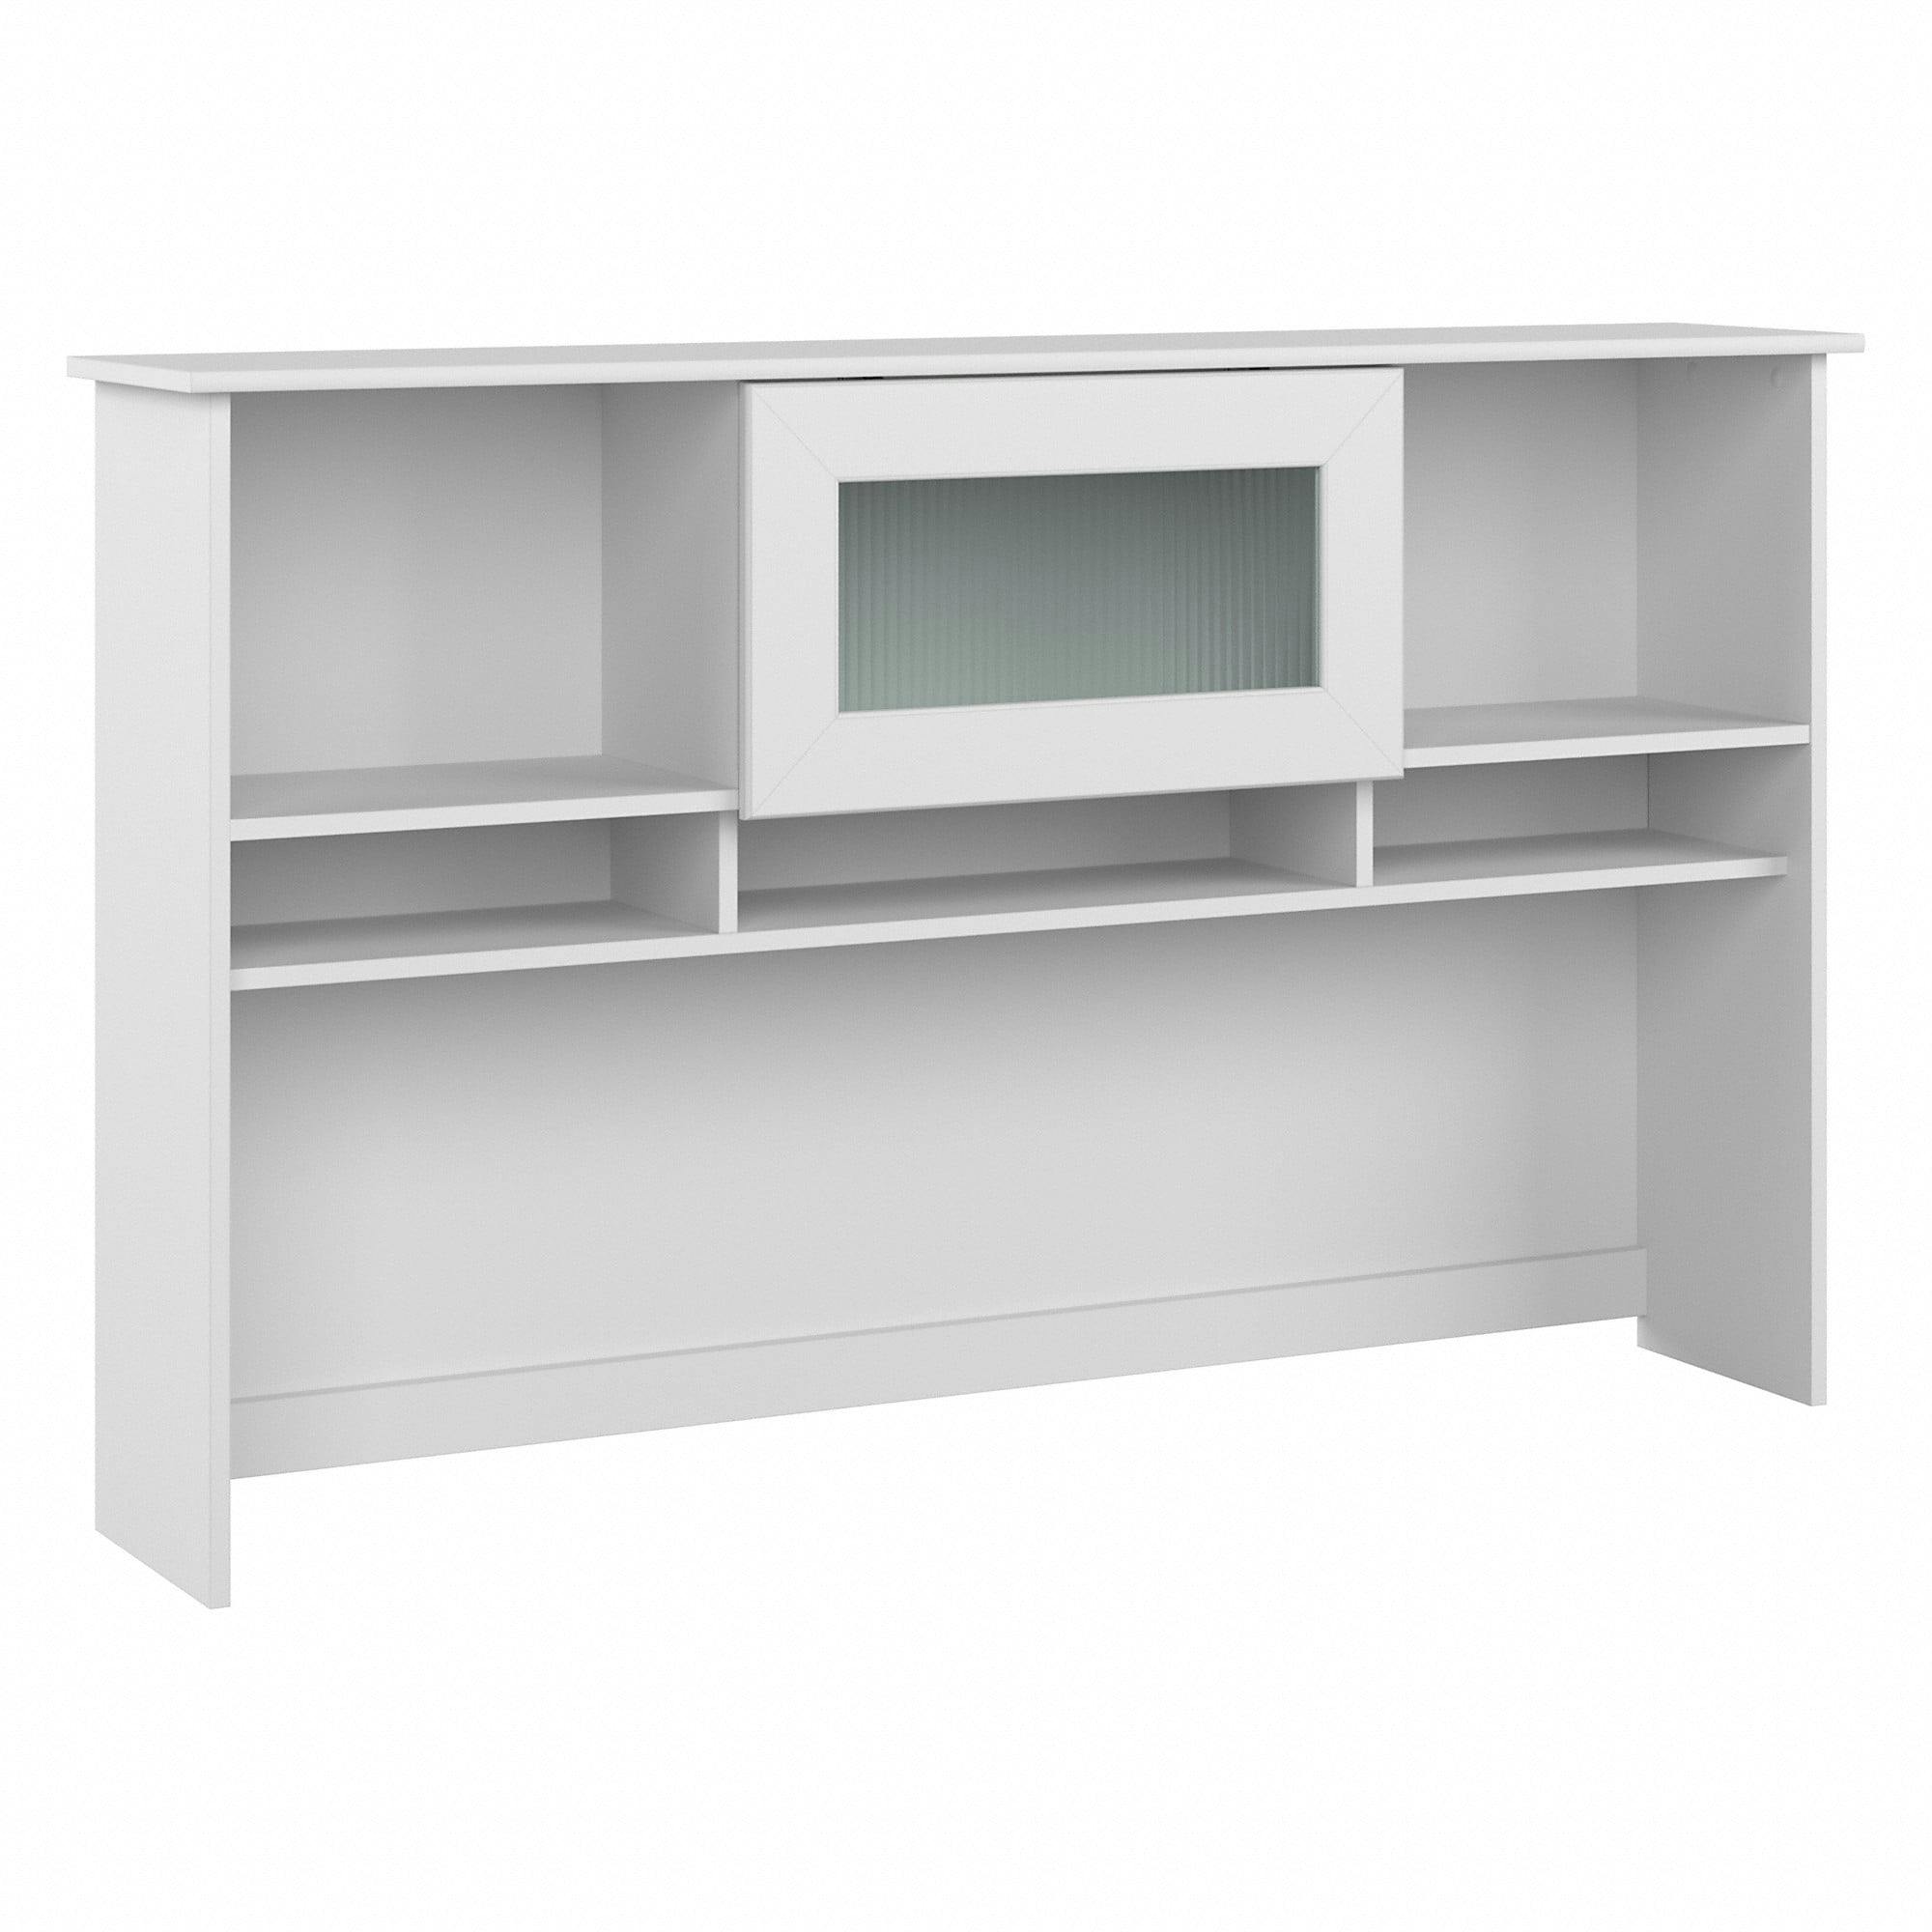 Elegant White Desk Hutch with Fluted Glass Door and Cable Management